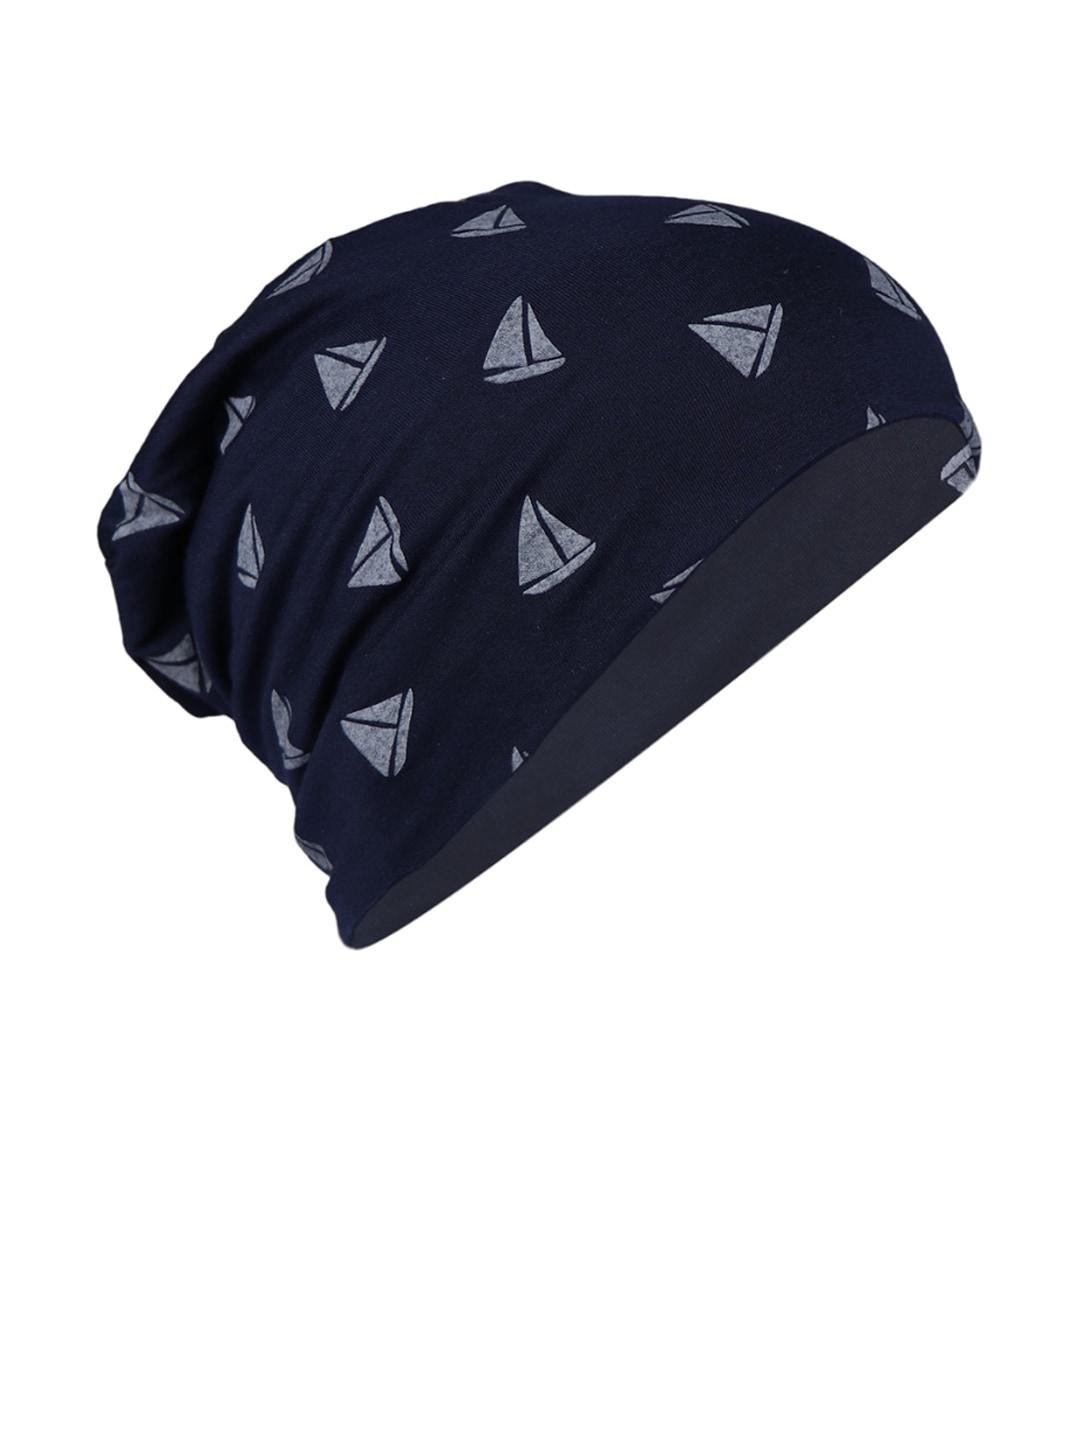 isweven unisex navy blue printed beanie